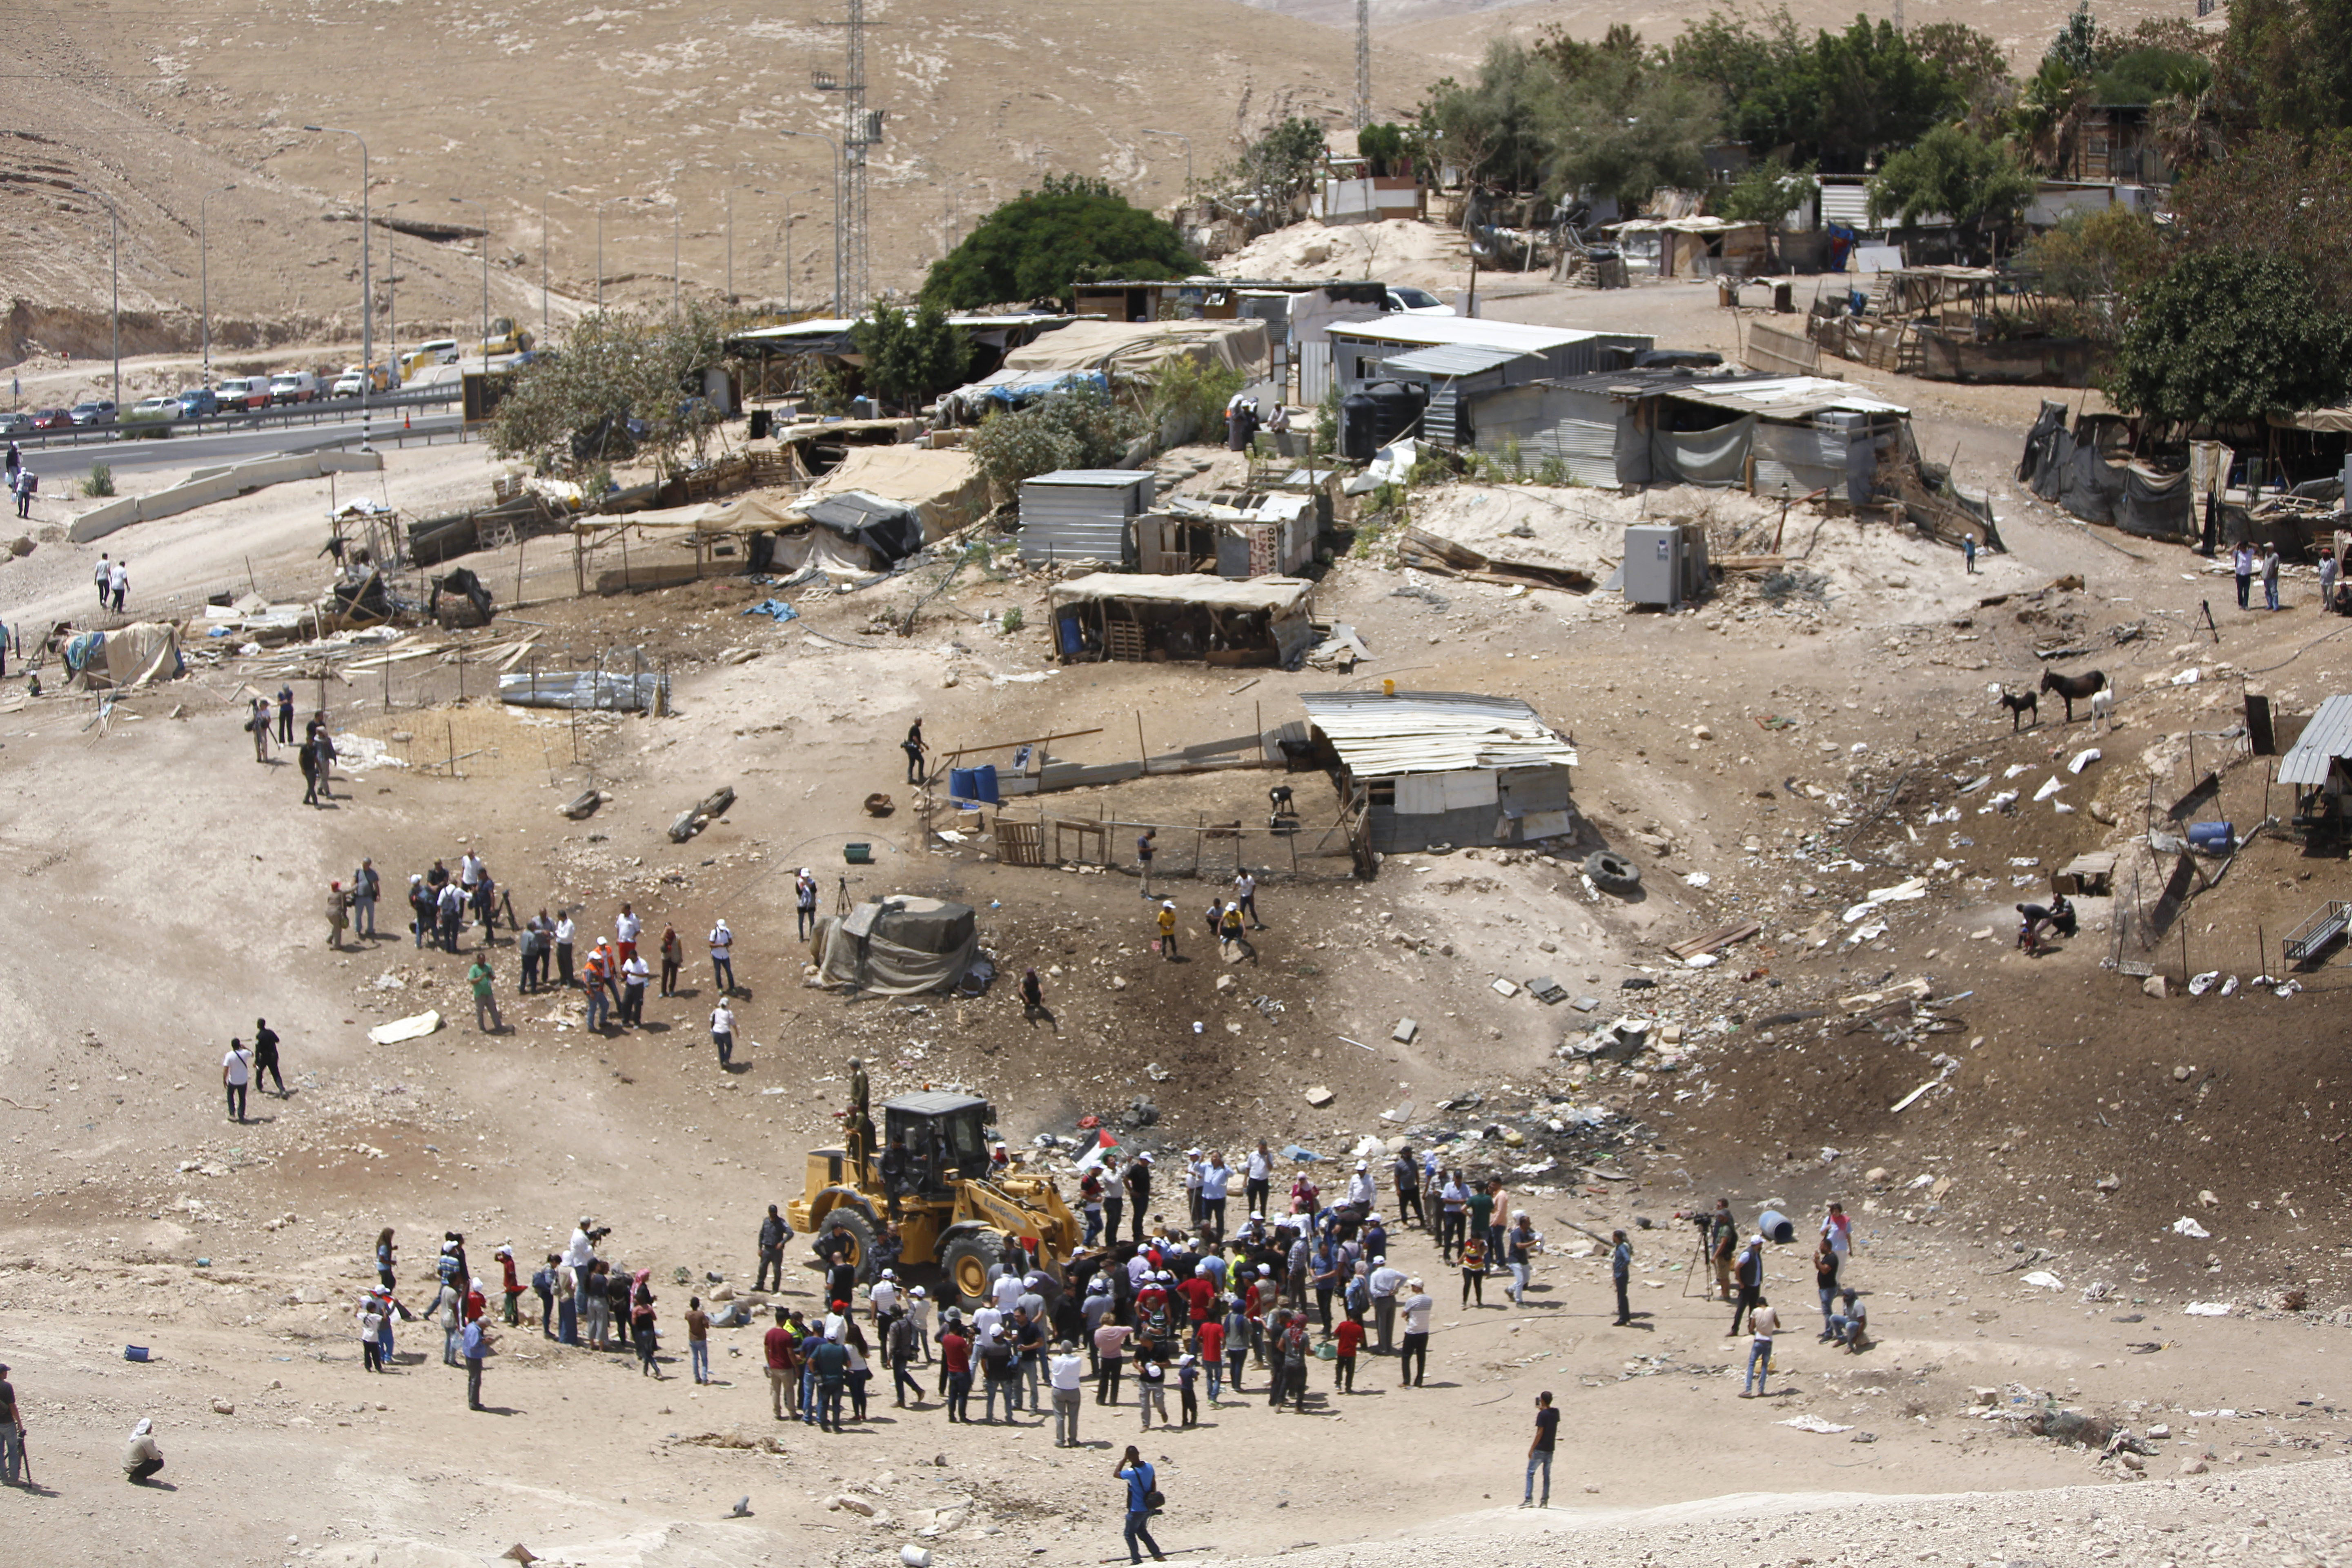 Palestinians gather around a bulldozer in Khan al-Ahmar, Wednesday, July 4, 2018. Israeli police scuffled with activists at a West Bank Bedouin community ahead of its demolition. (AP Photo/Majdi Mohammed)